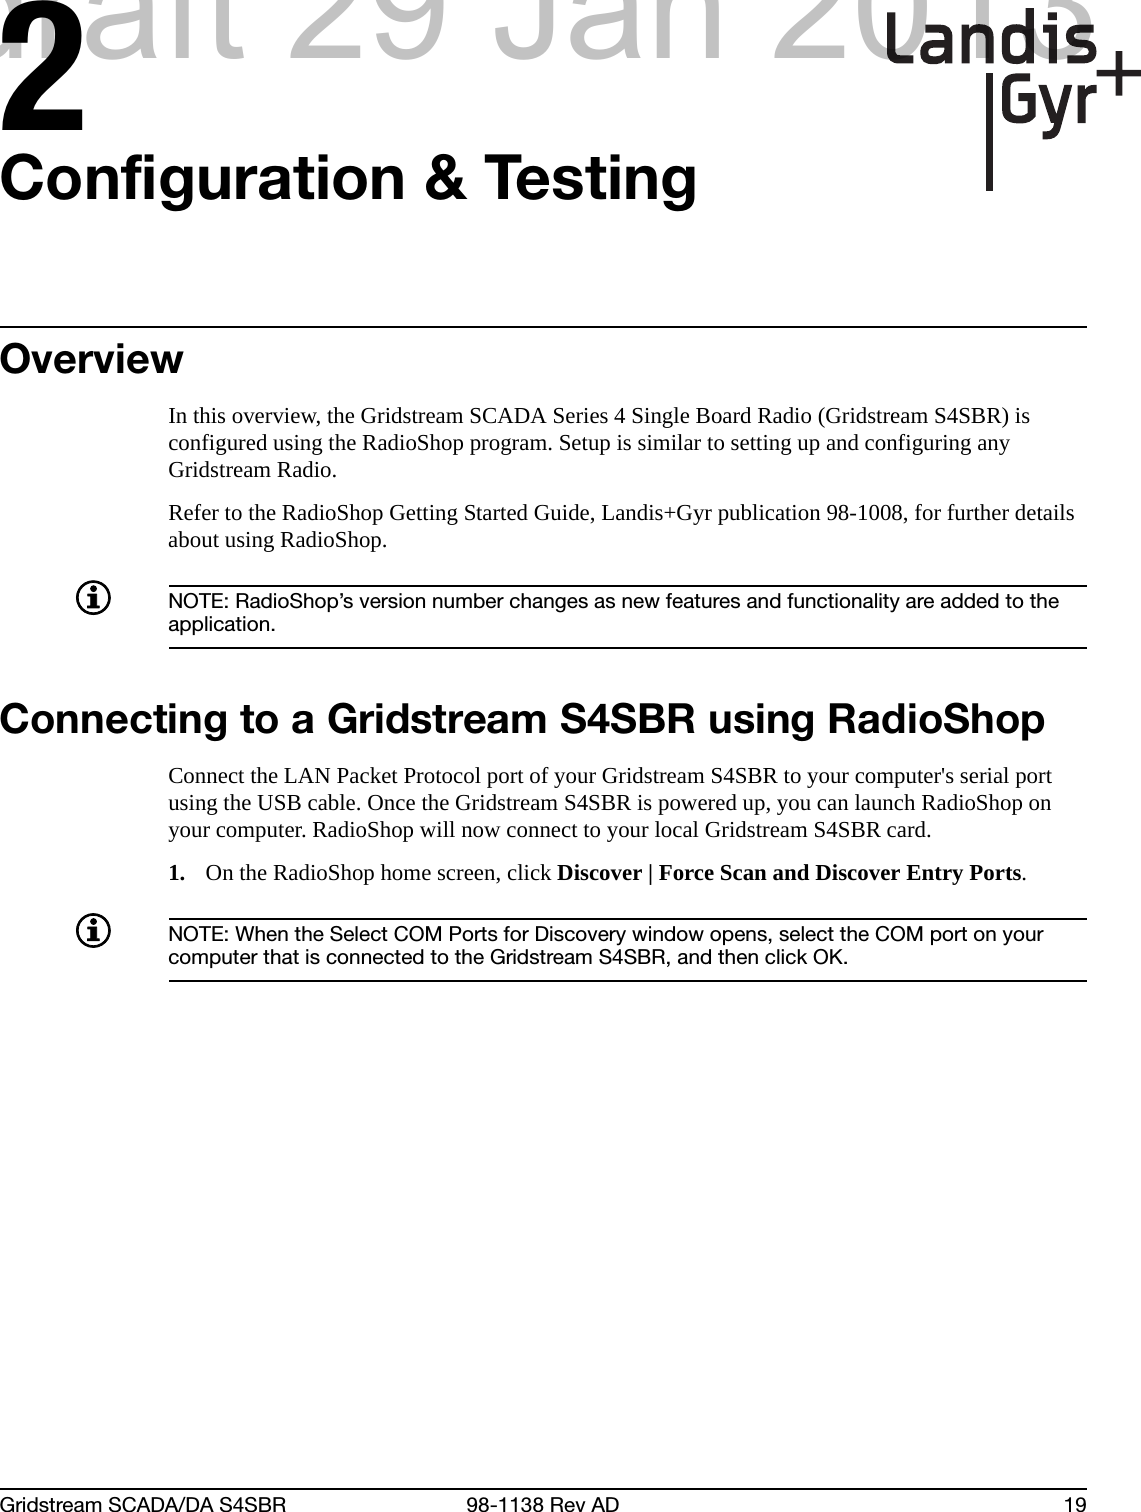 2Gridstream SCADA/DA S4SBR 98-1138 Rev AD 19Configuration &amp; TestingOverviewIn this overview, the Gridstream SCADA Series 4 Single Board Radio (Gridstream S4SBR) is configured using the RadioShop program. Setup is similar to setting up and configuring any Gridstream Radio.Refer to the RadioShop Getting Started Guide, Landis+Gyr publication 98-1008, for further details about using RadioShop.NOTE: RadioShop’s version number changes as new features and functionality are added to the application.Connecting to a Gridstream S4SBR using RadioShopConnect the LAN Packet Protocol port of your Gridstream S4SBR to your computer&apos;s serial port using the USB cable. Once the Gridstream S4SBR is powered up, you can launch RadioShop on your computer. RadioShop will now connect to your local Gridstream S4SBR card.1. On the RadioShop home screen, click Discover | Force Scan and Discover Entry Ports.NOTE: When the Select COM Ports for Discovery window opens, select the COM port on your computer that is connected to the Gridstream S4SBR, and then click OK.draft 29 Jan 2013